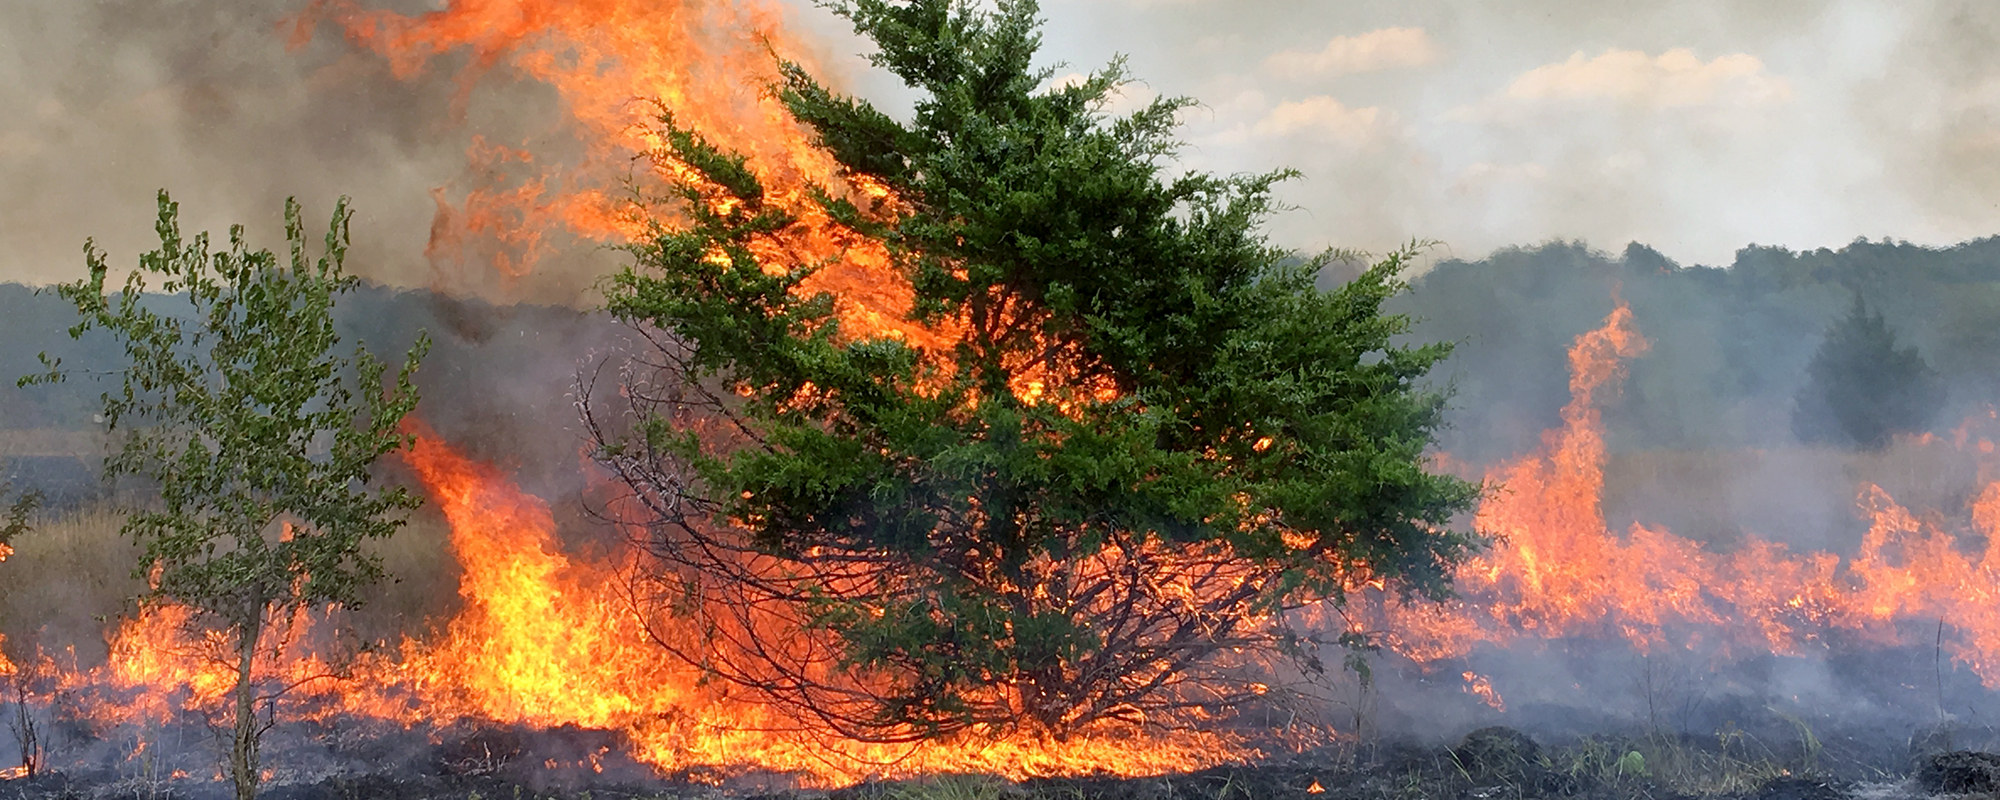 Move Brush Piles, Dead Trees and Volatile Vegetation Away From Firebreaks Prior to a Prescribed Burn